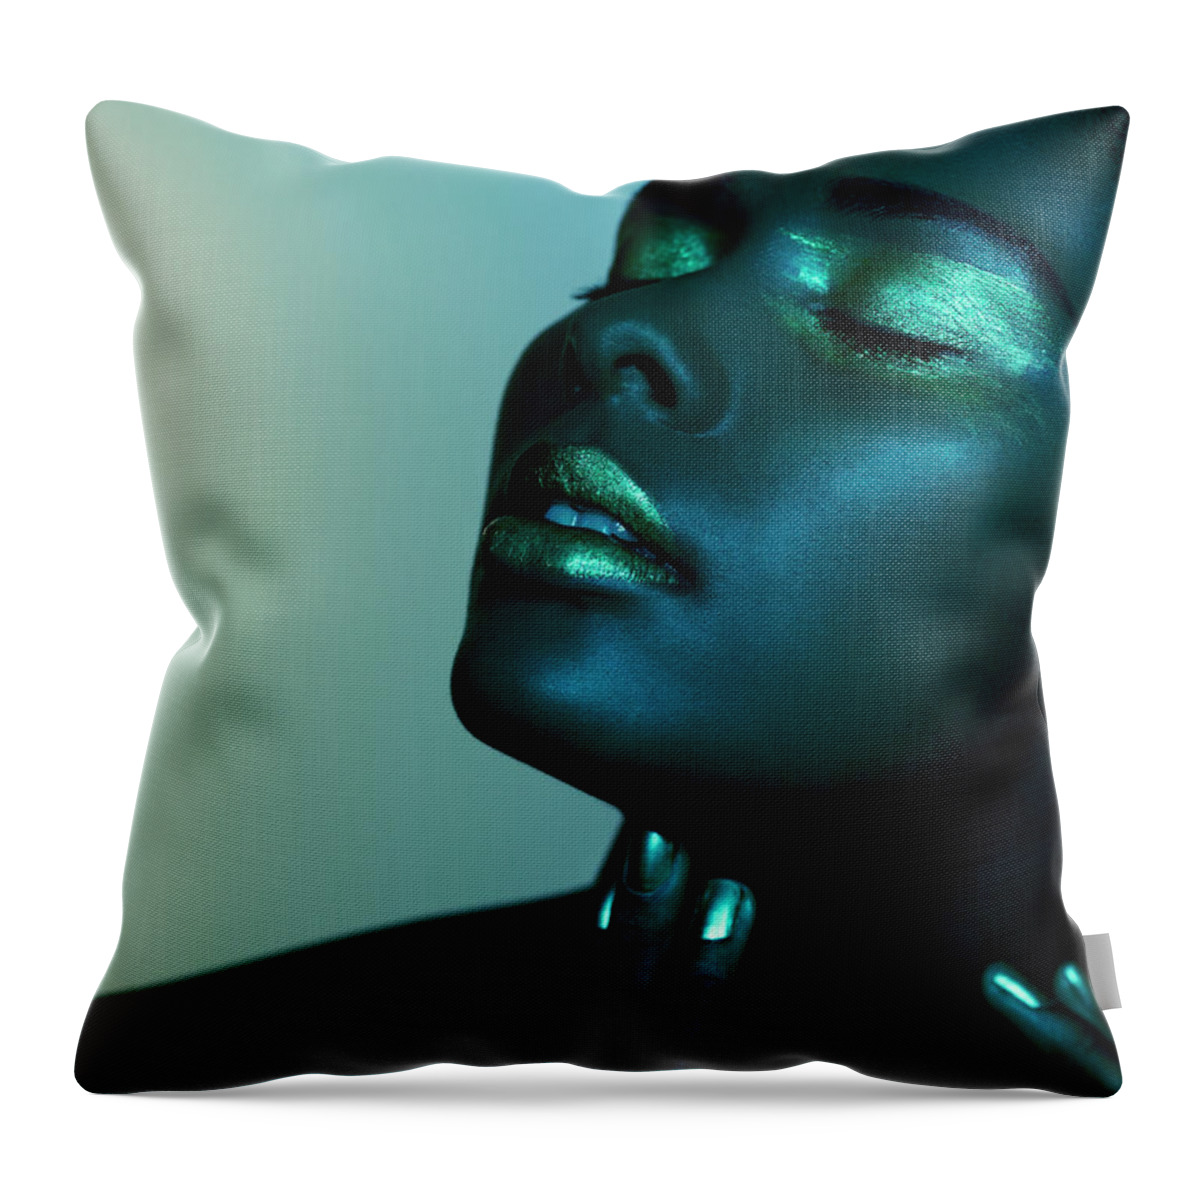 People Throw Pillow featuring the photograph Dark Image Of Black Female Closed Eyes by Jonathan Storey